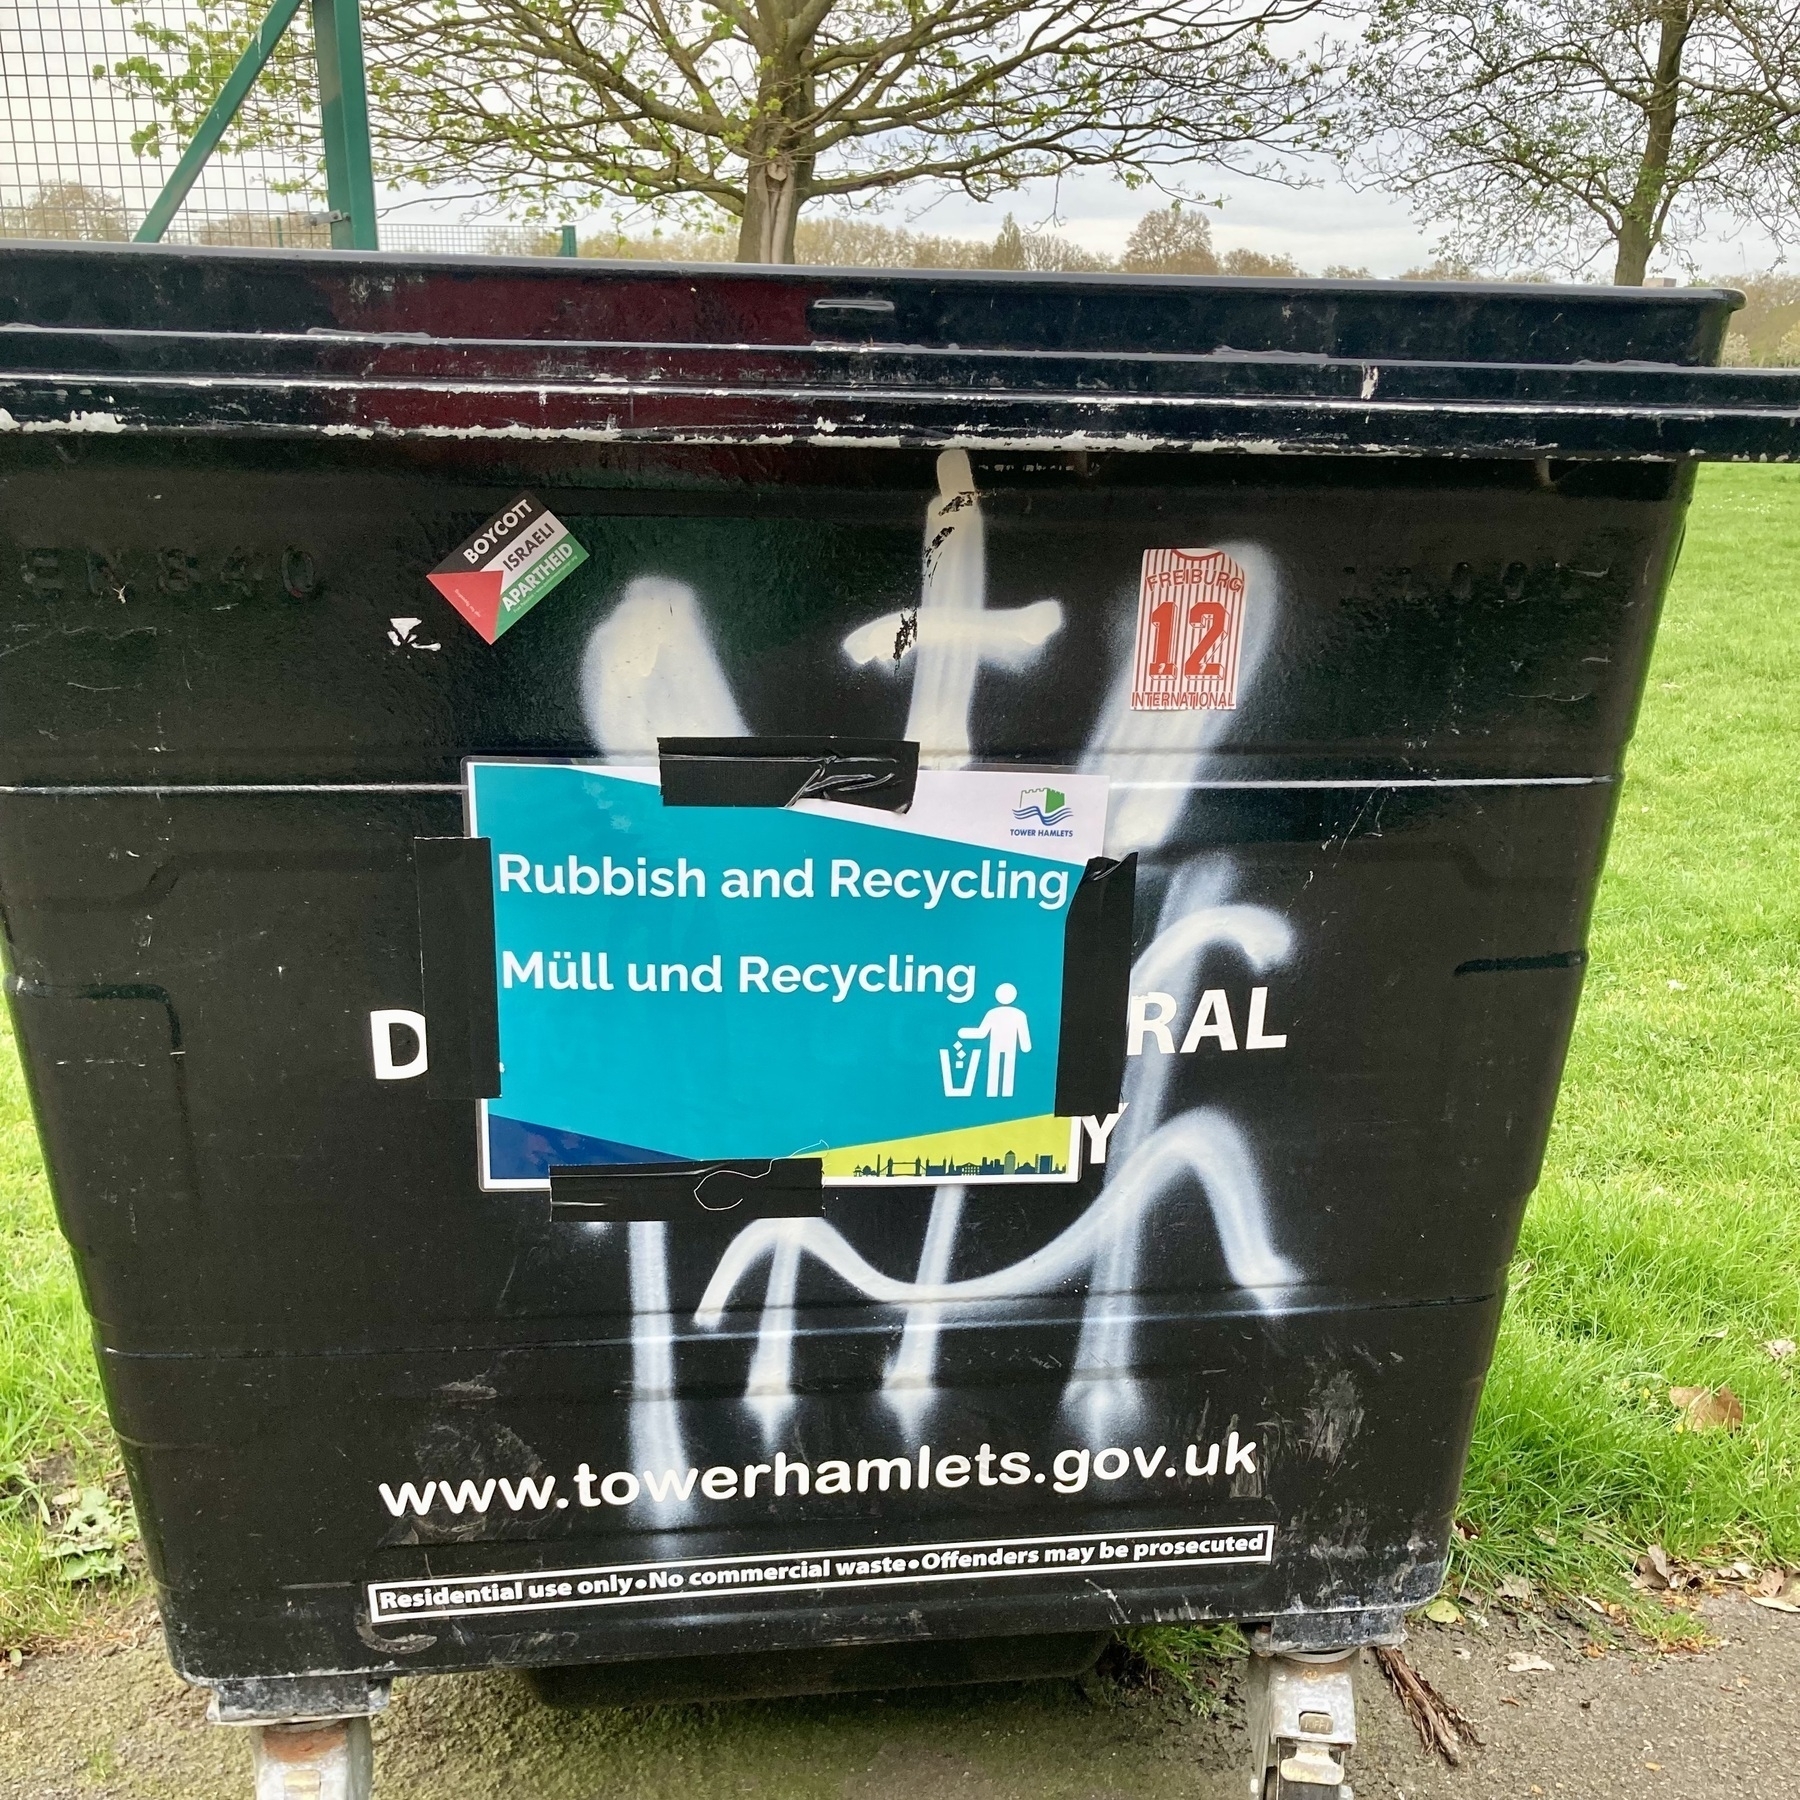 A black dumpster with a multilingual notice in English and German, and a Free Palestine sticker